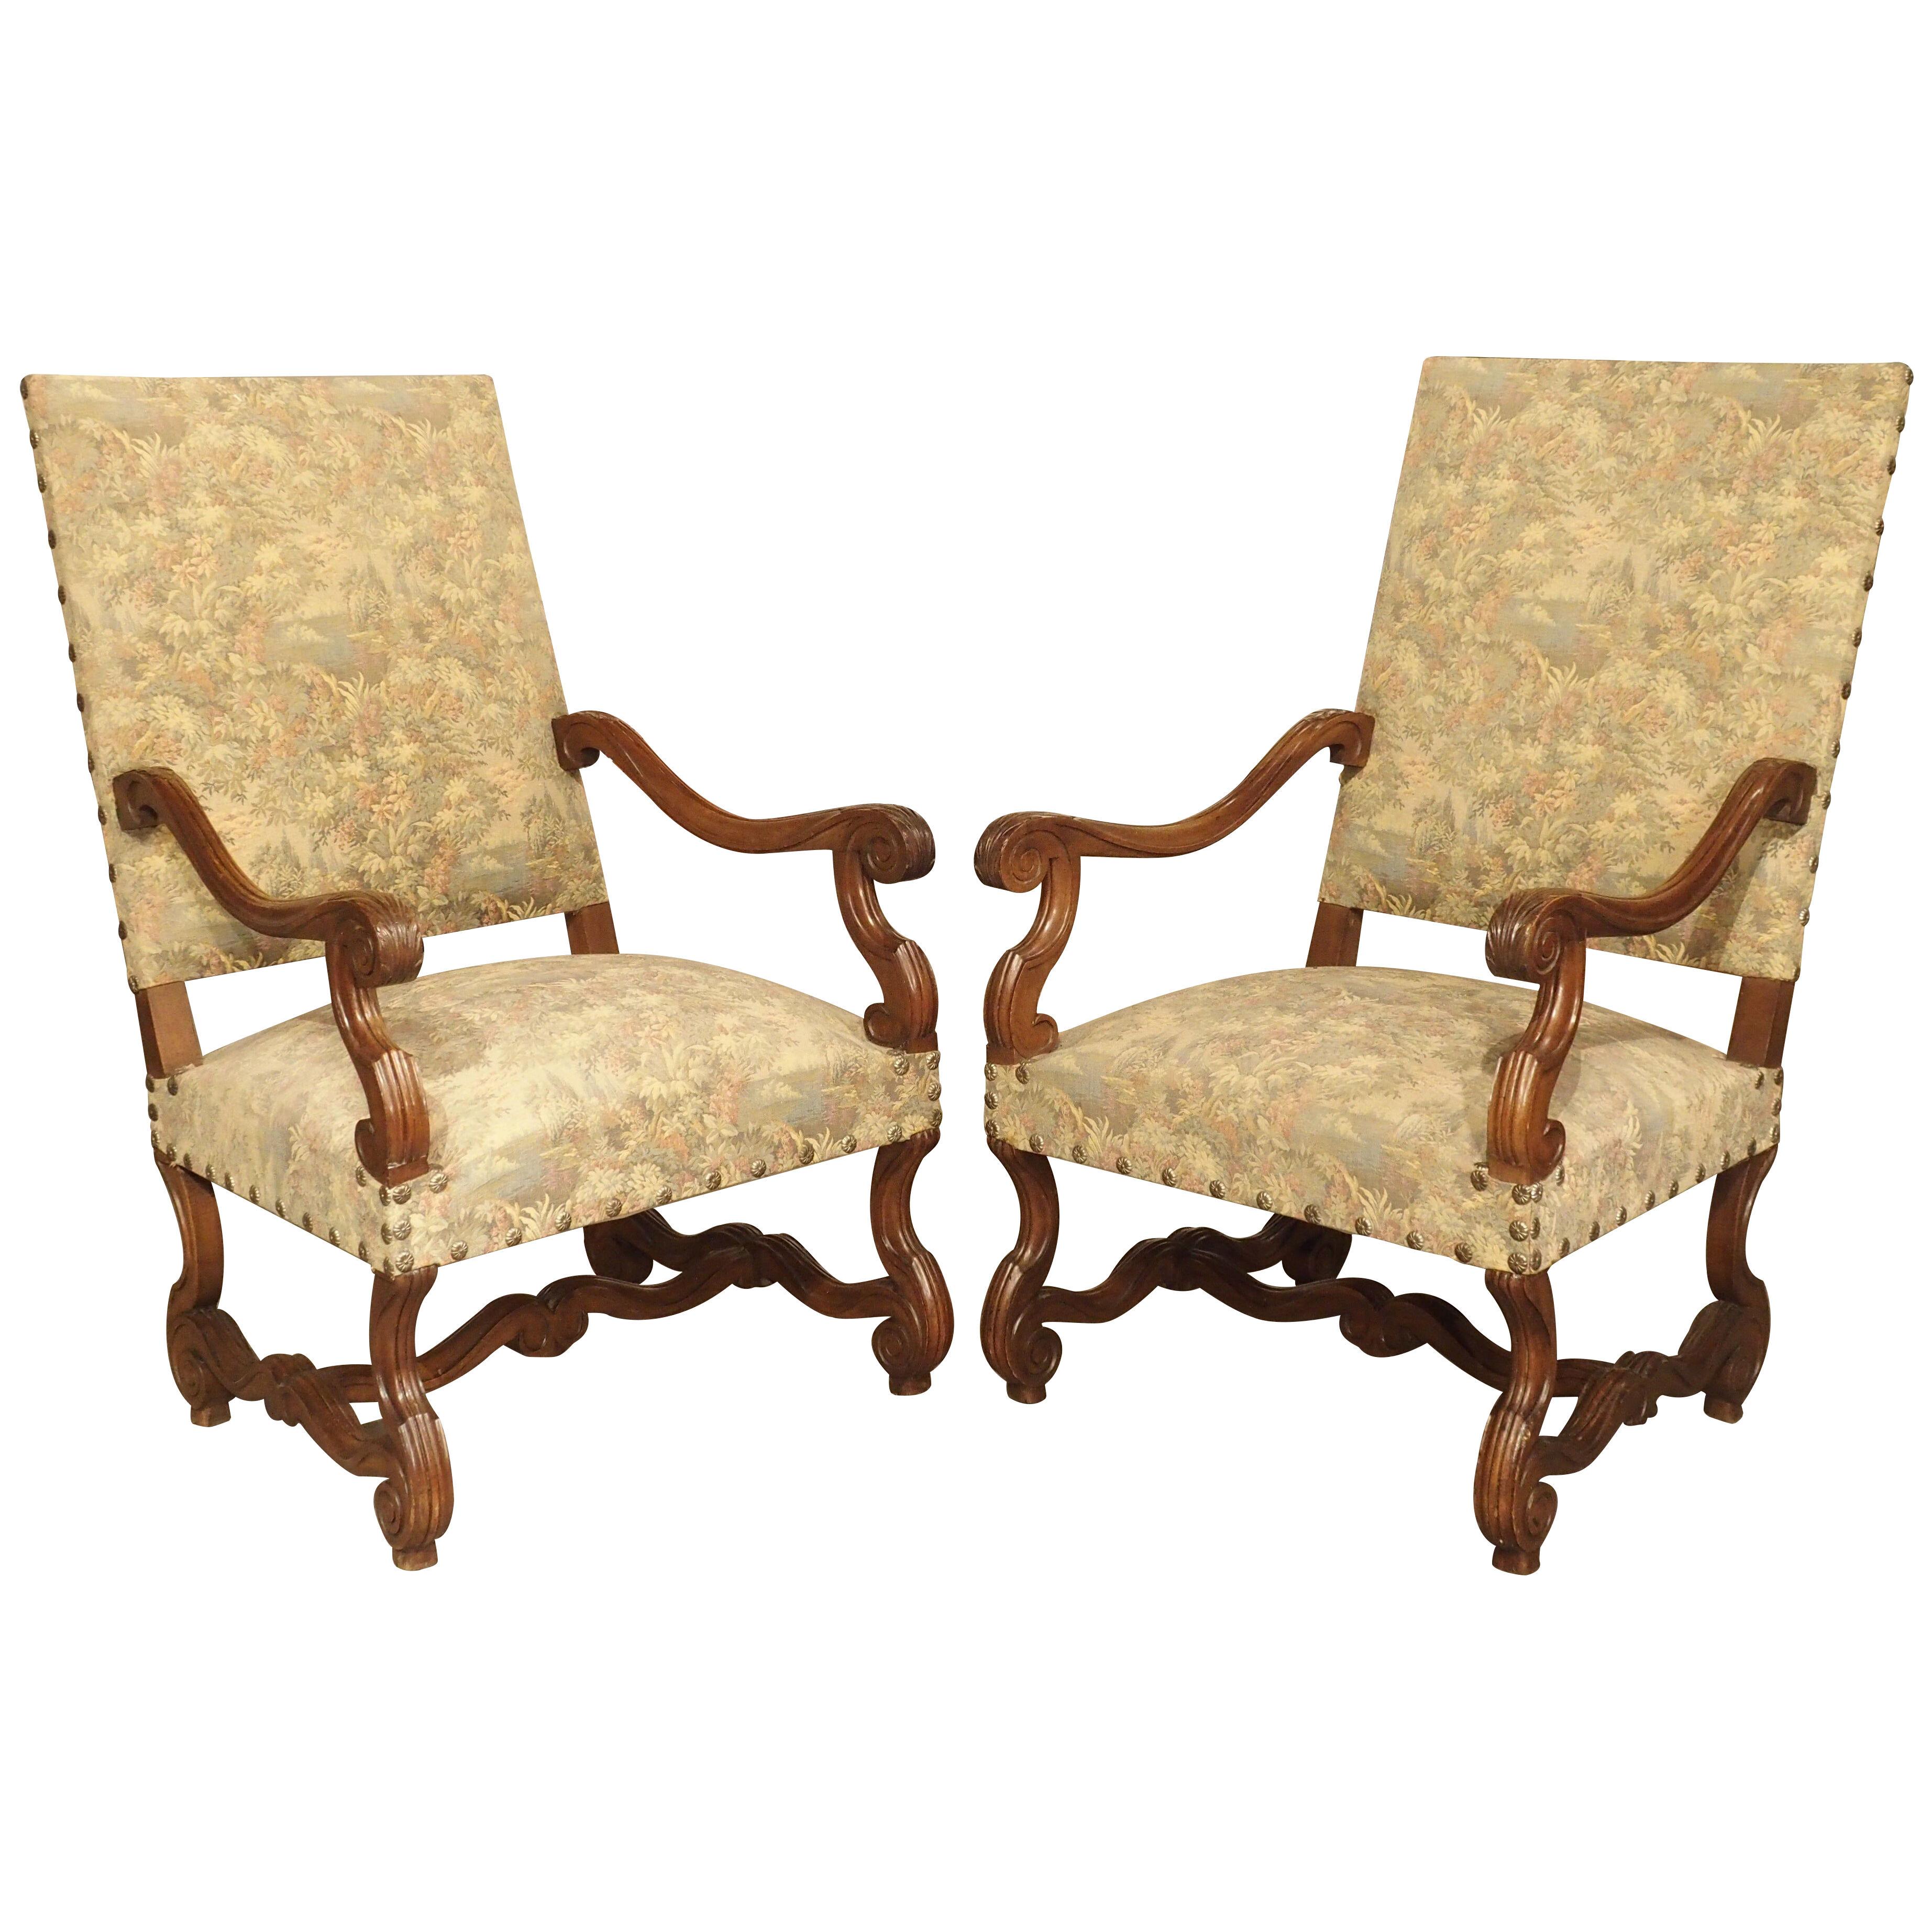 Pair of French Os-de-Mouton Armchairs in Carved Walnut, Circa 1900